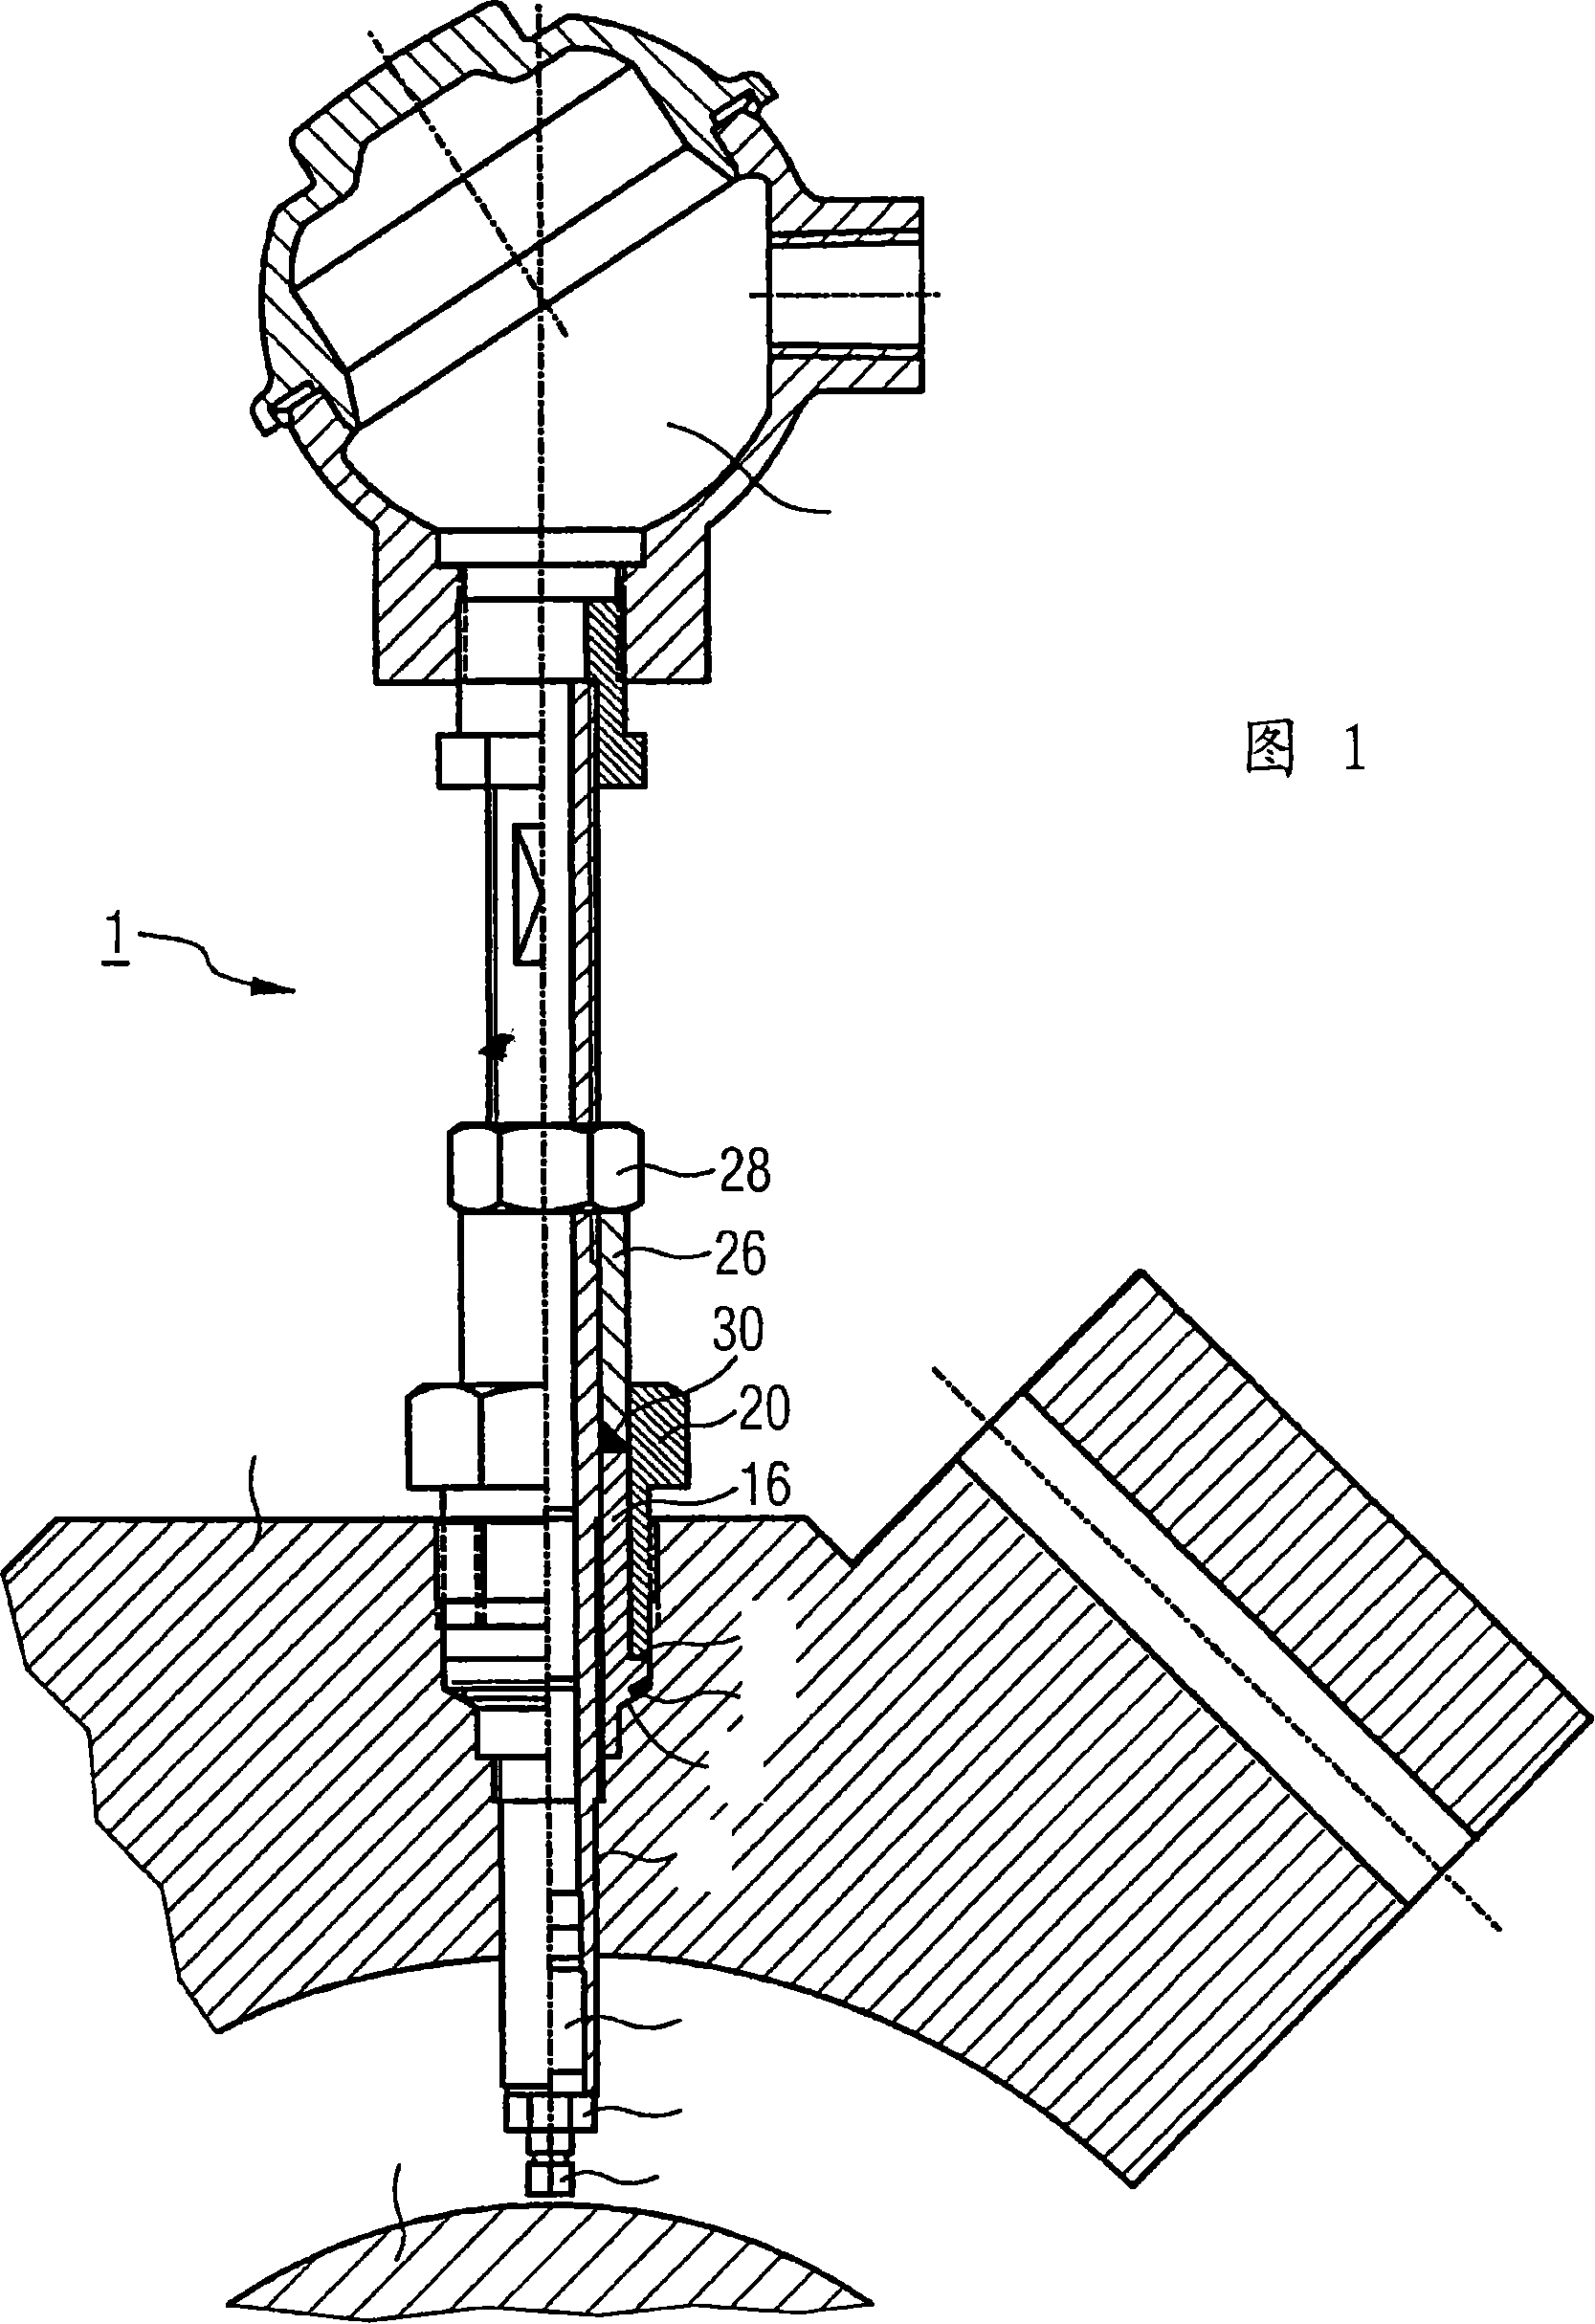 Probe holder system, message for fixing a probe holder system and method for adjusting a probe